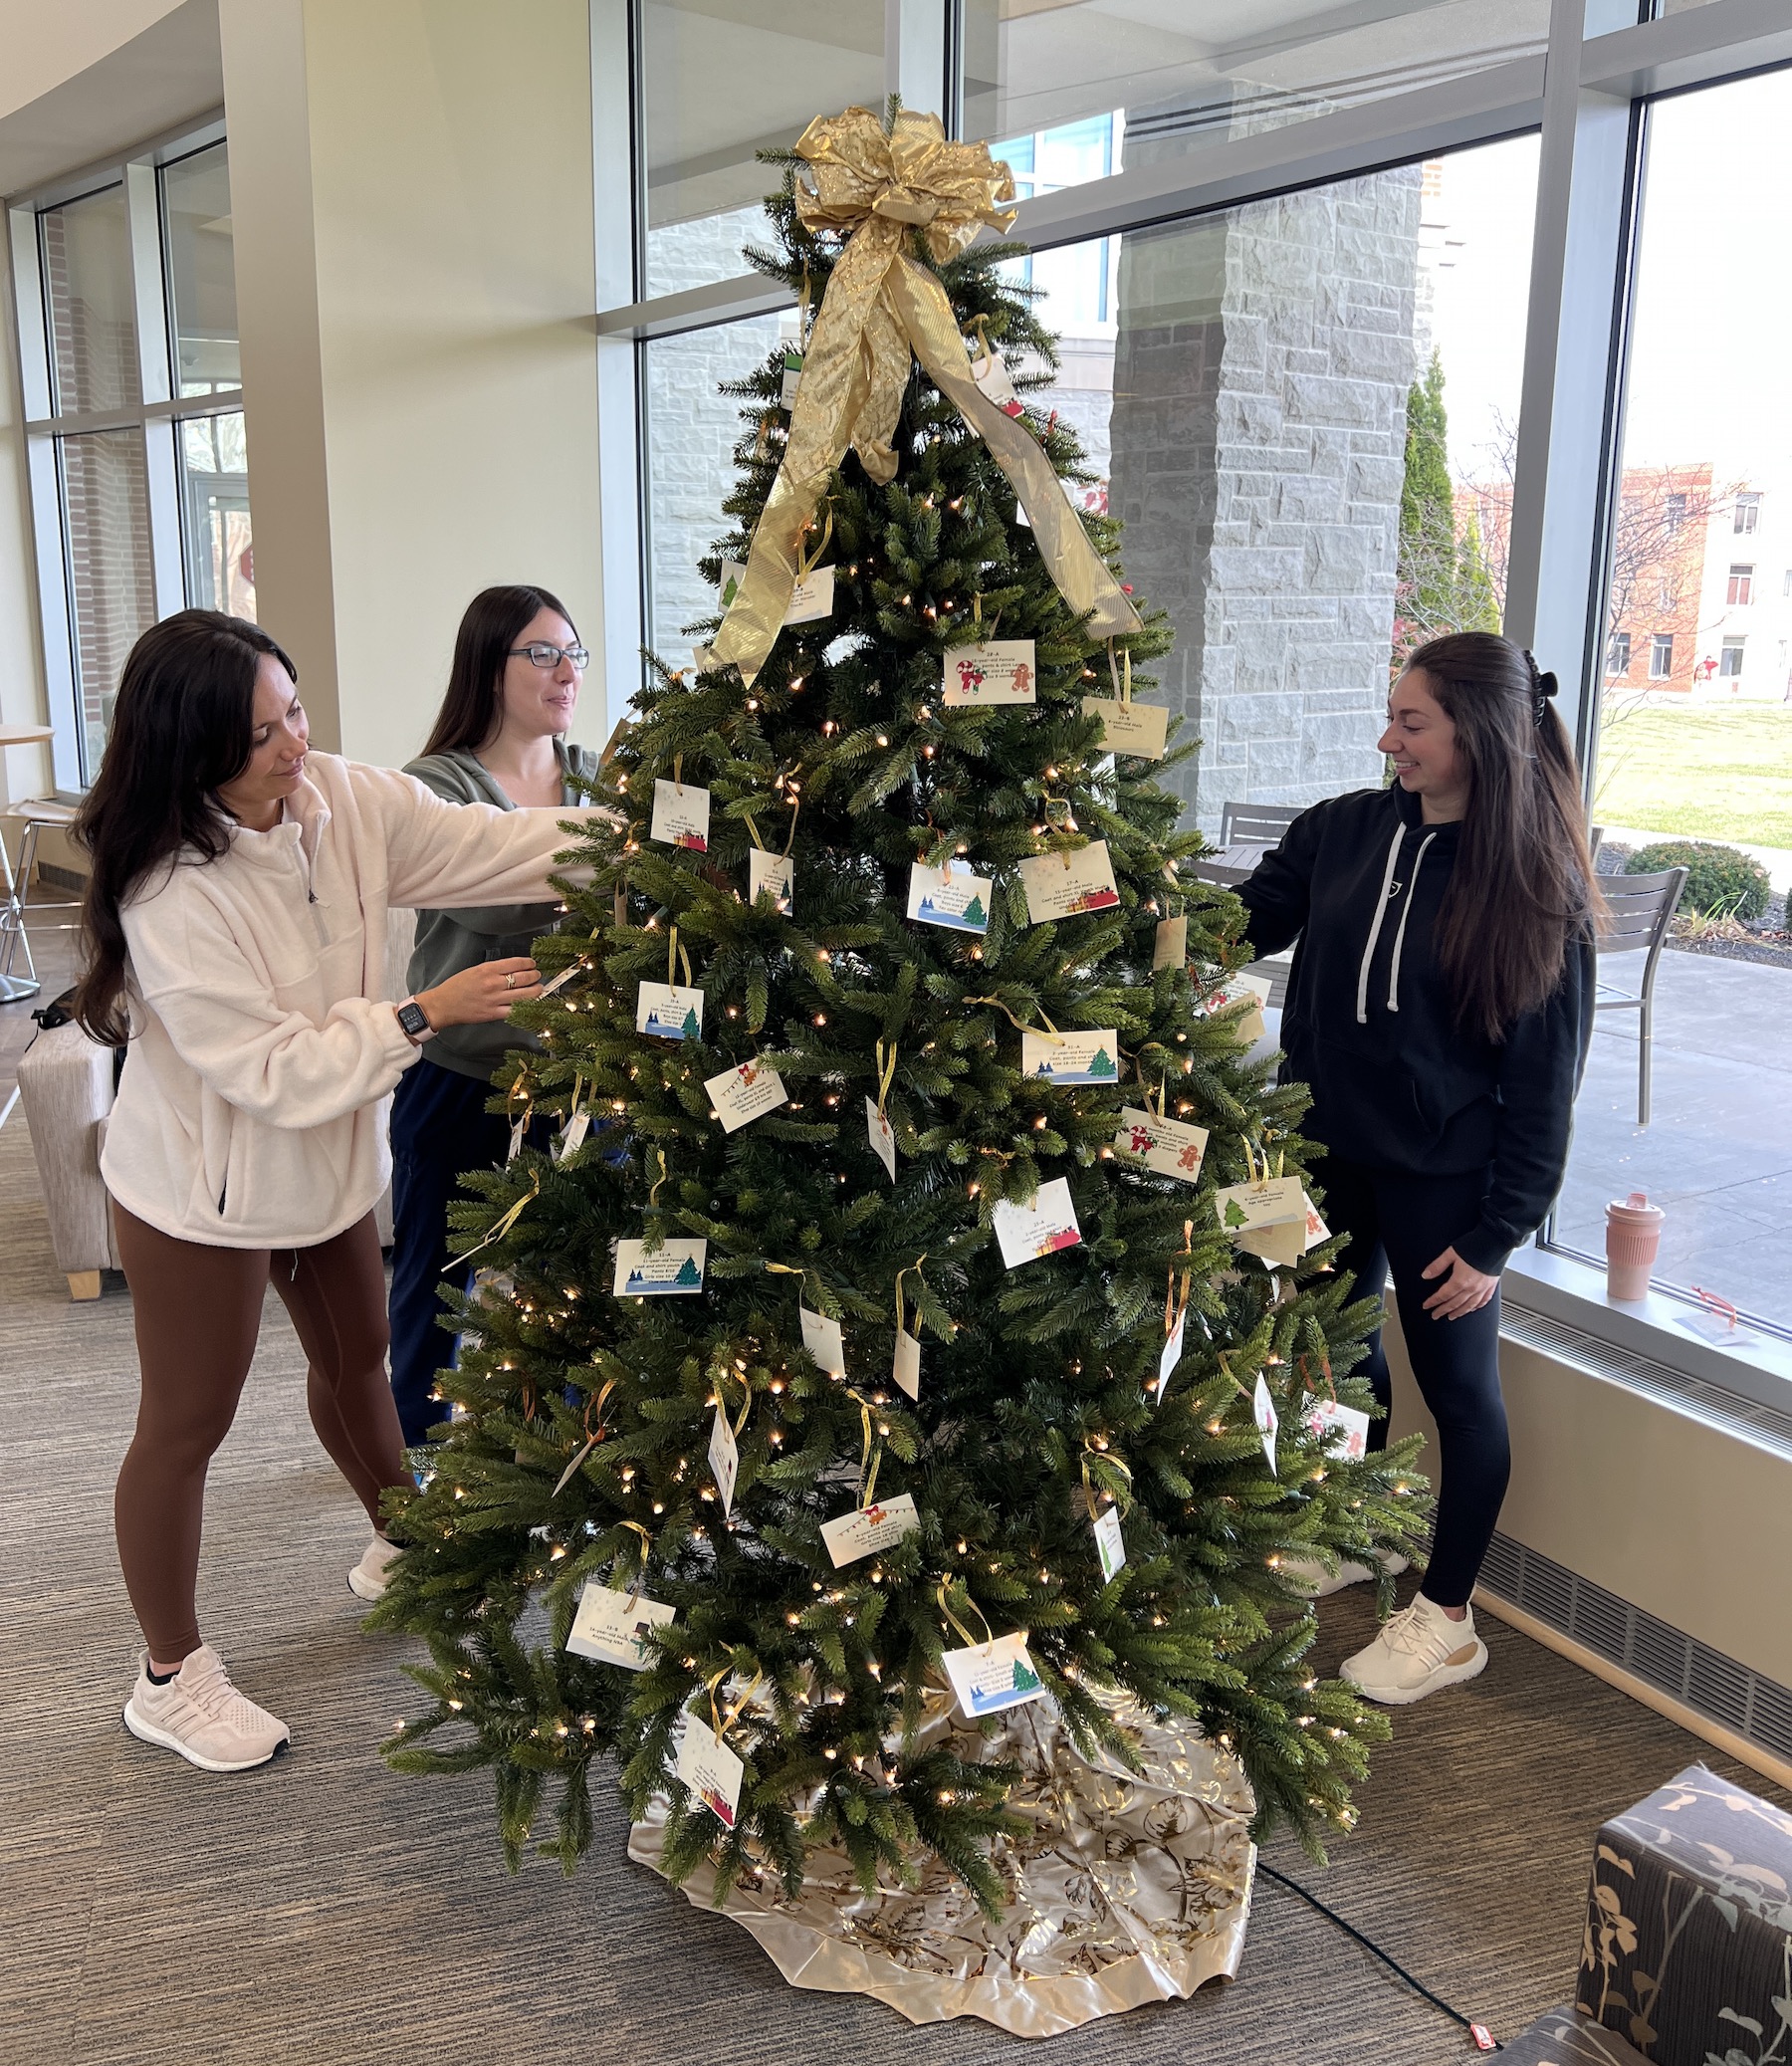 Three WVSOM students decorate an "angel tree" with names for the Christmas season. The students are from left, Alexandra Crawford, a second-year from Virginia Beach, Va.; Jaclyn Buttafuoco, a second-year from Chicago, Ill.; and Madison Dale, a second-year from Washington, Mich.